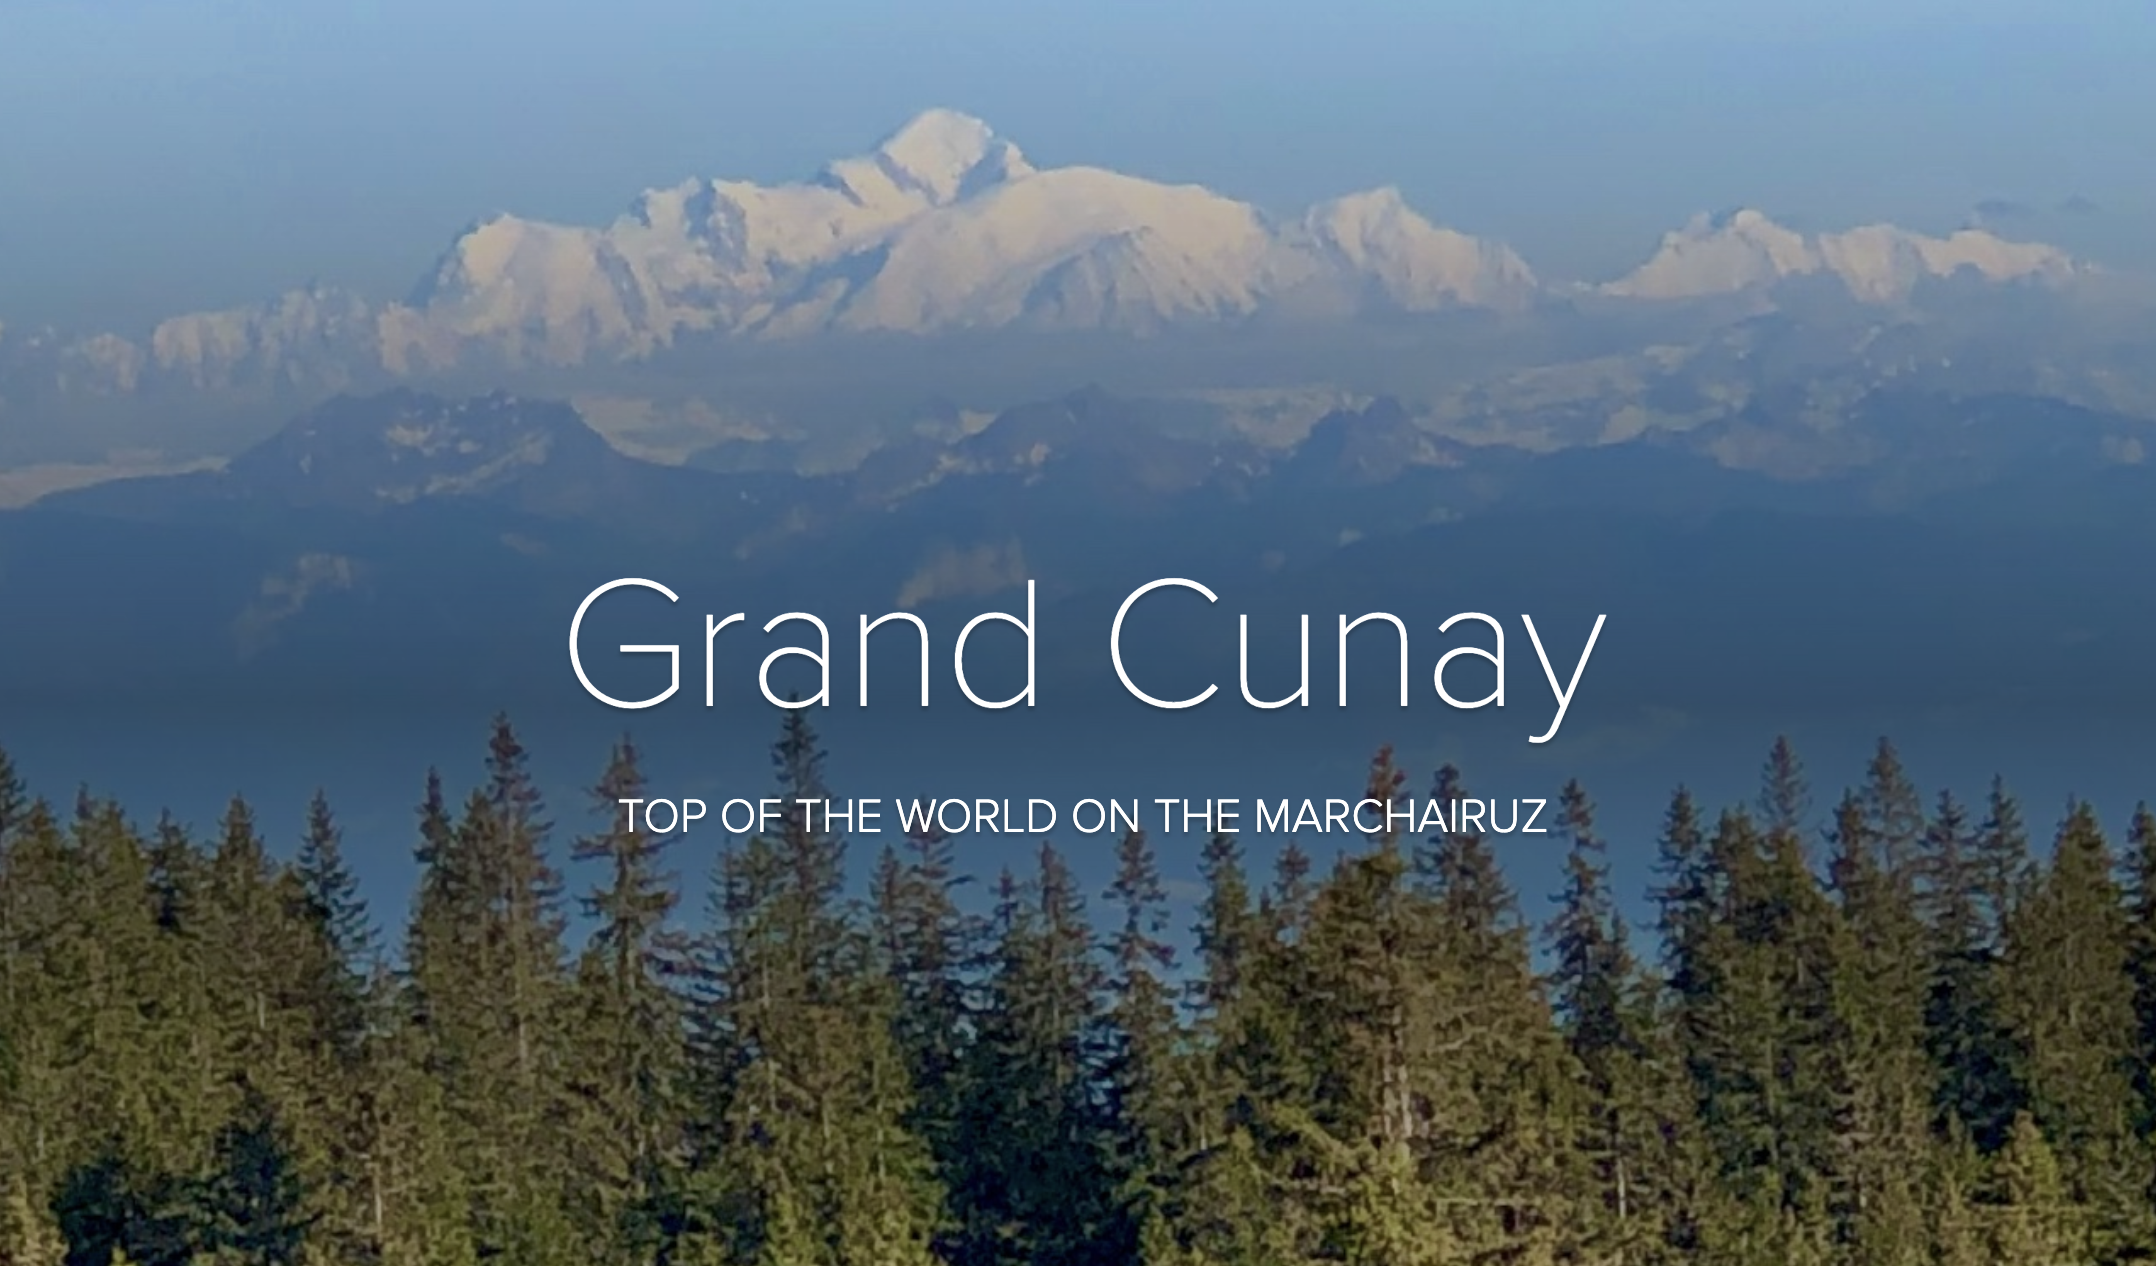 From the Col du Marchairuz to the Top of the Grand Cunay | Geneva Notebook